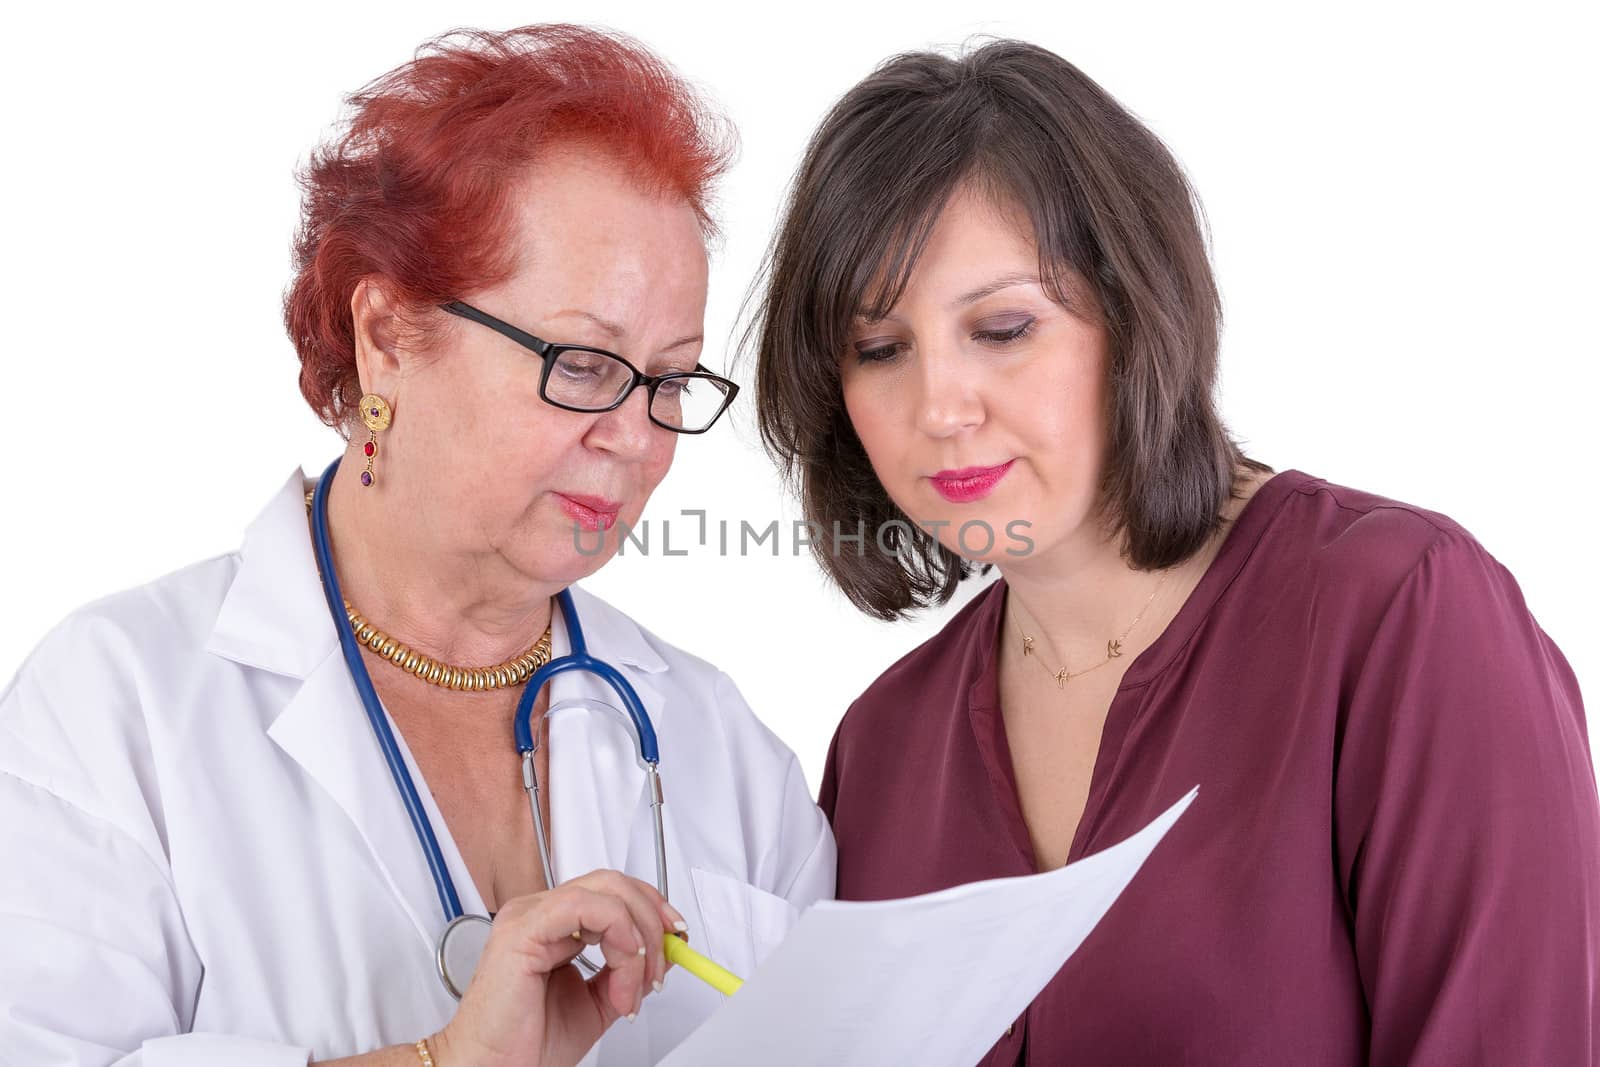 Female Doctor and her female patient discussing exam results, might be the payment options